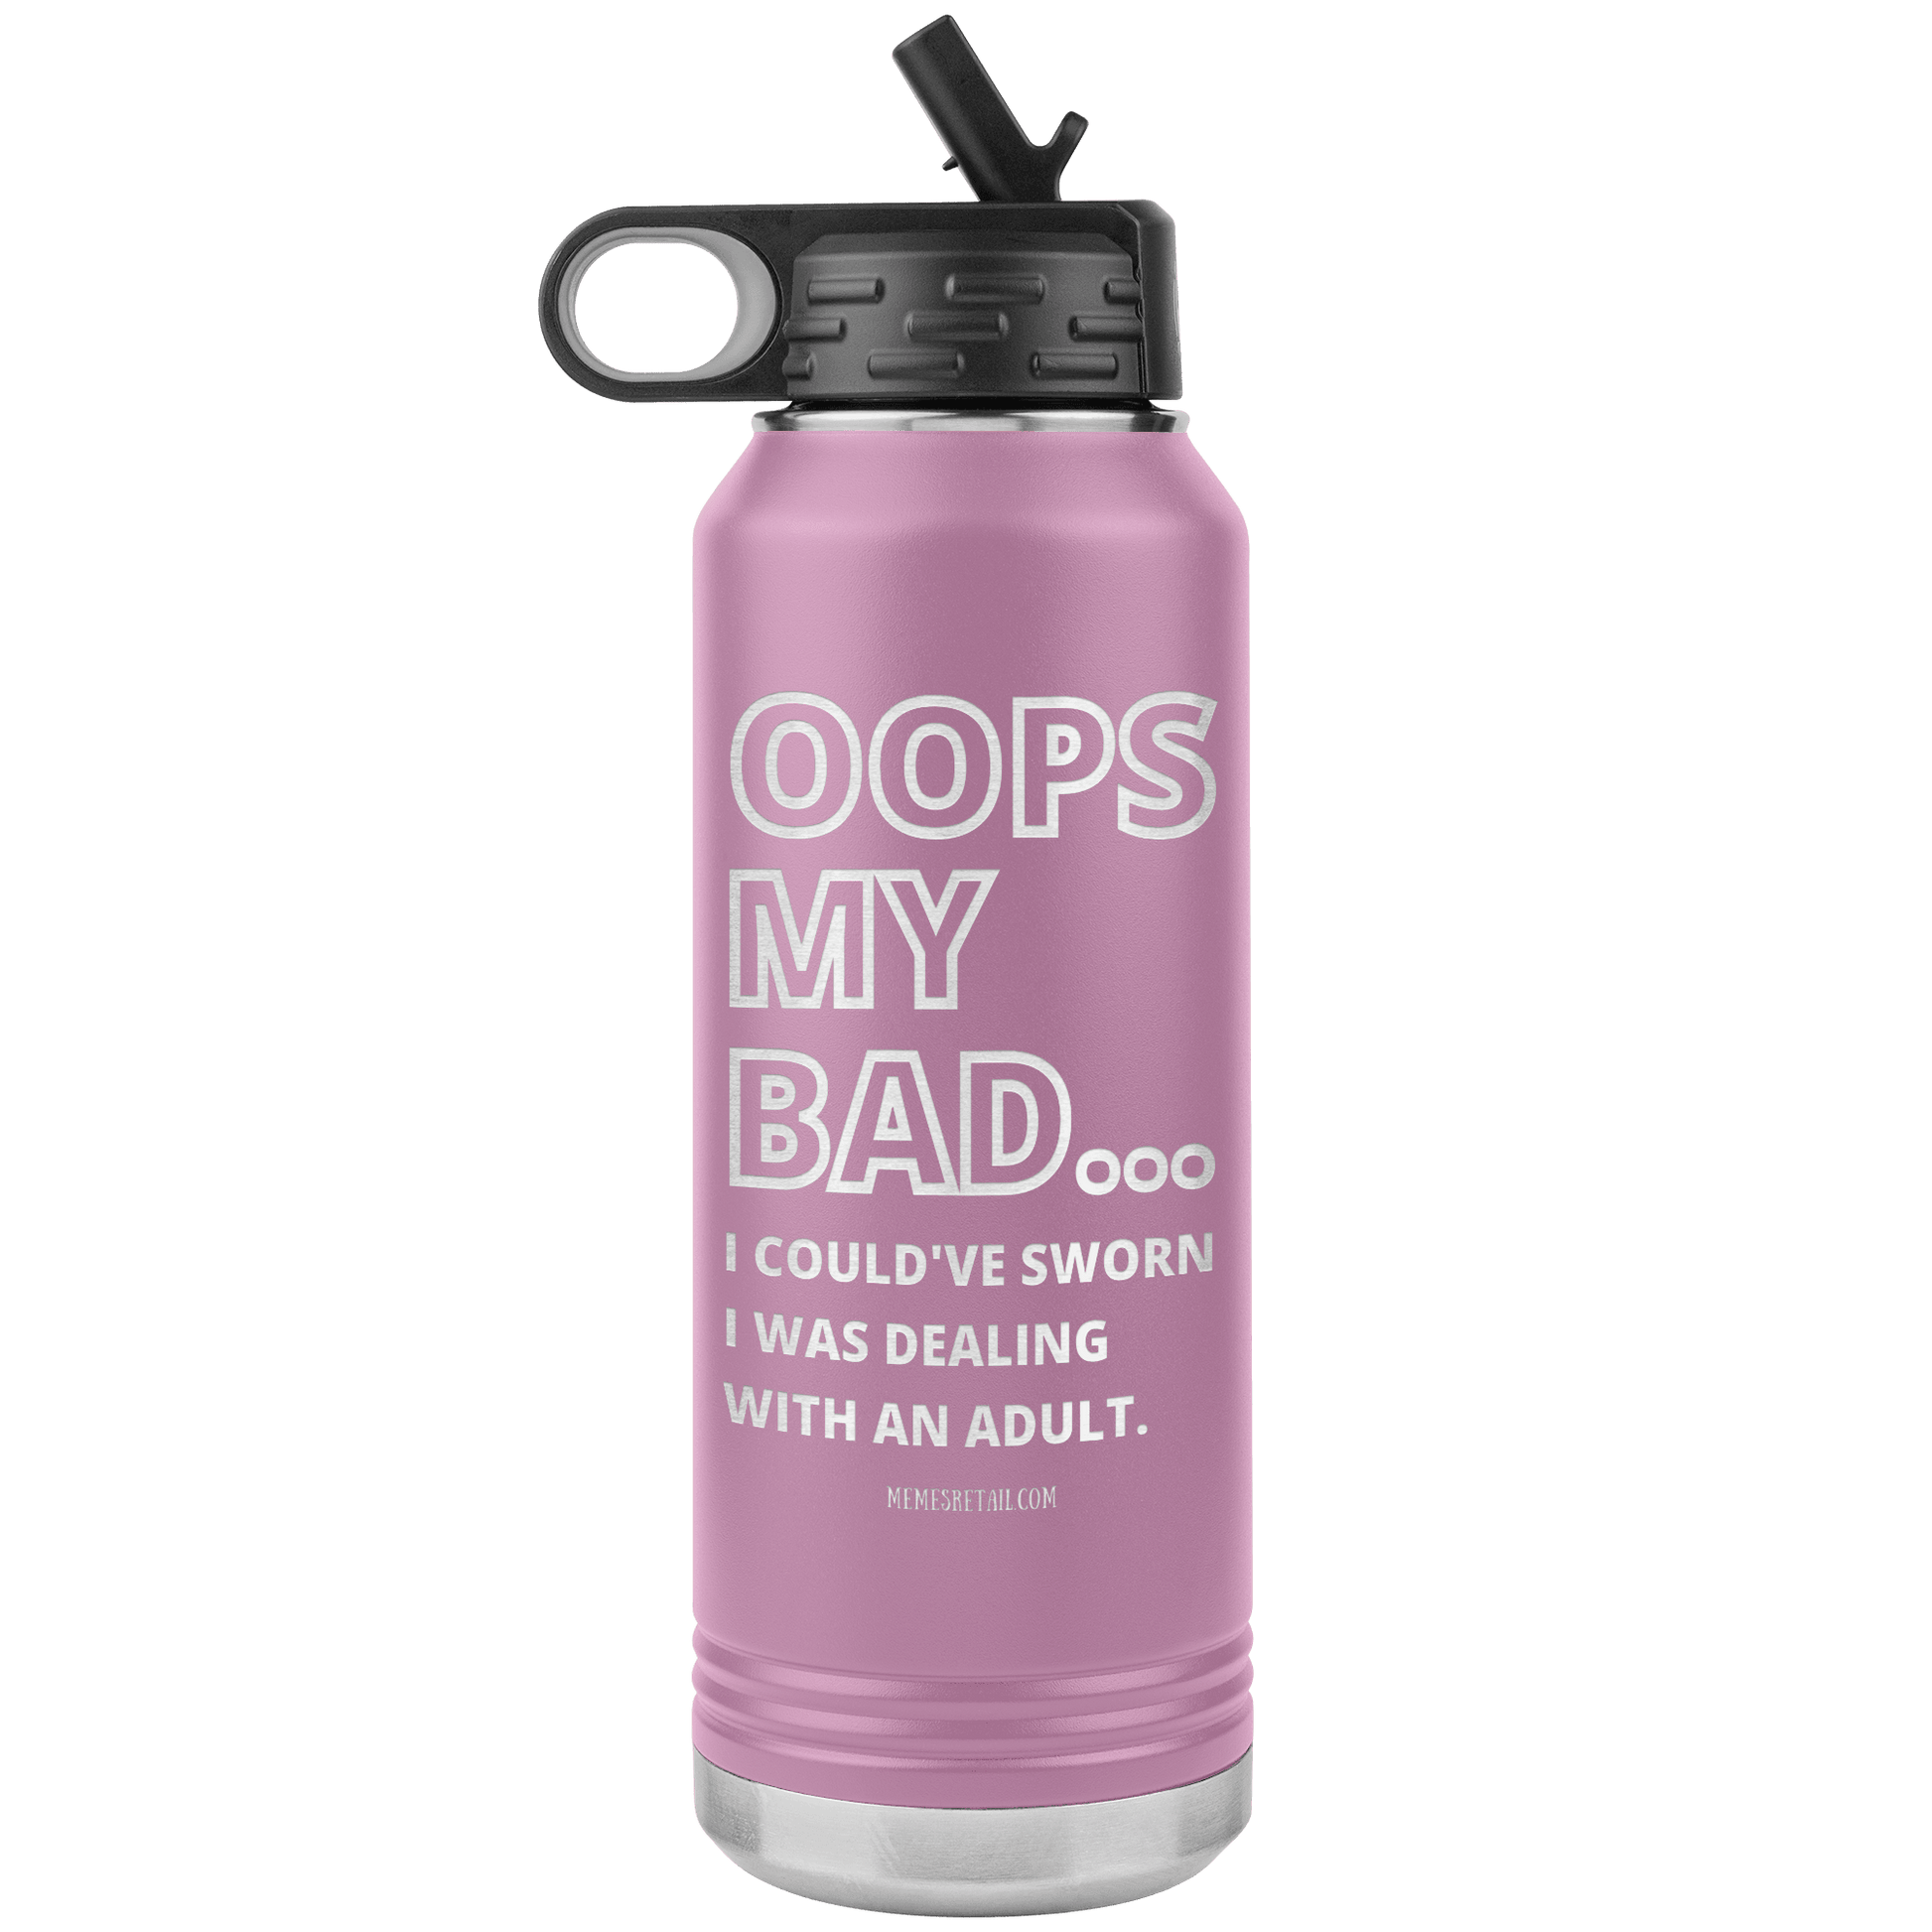 OOPS My bad...i could've sworn i was talking with an adult 32 oz Water Tumbler, Light Purple - MemesRetail.com